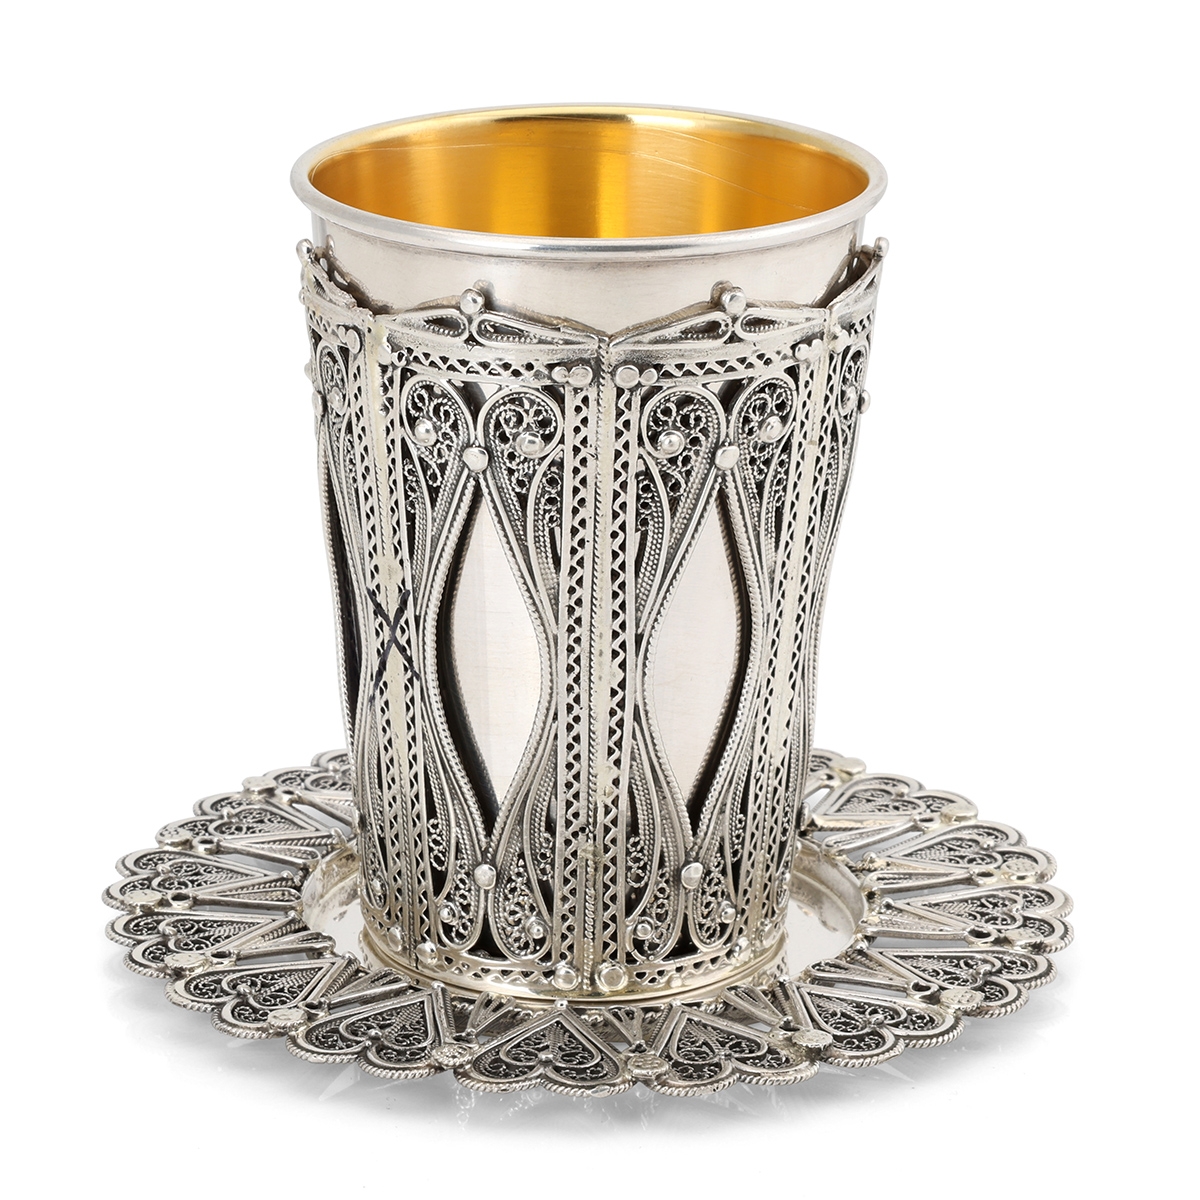 Traditional Yemenite Art Handcrafted Sterling Silver Luxury Kiddush Cup In Decorative Holder - 1